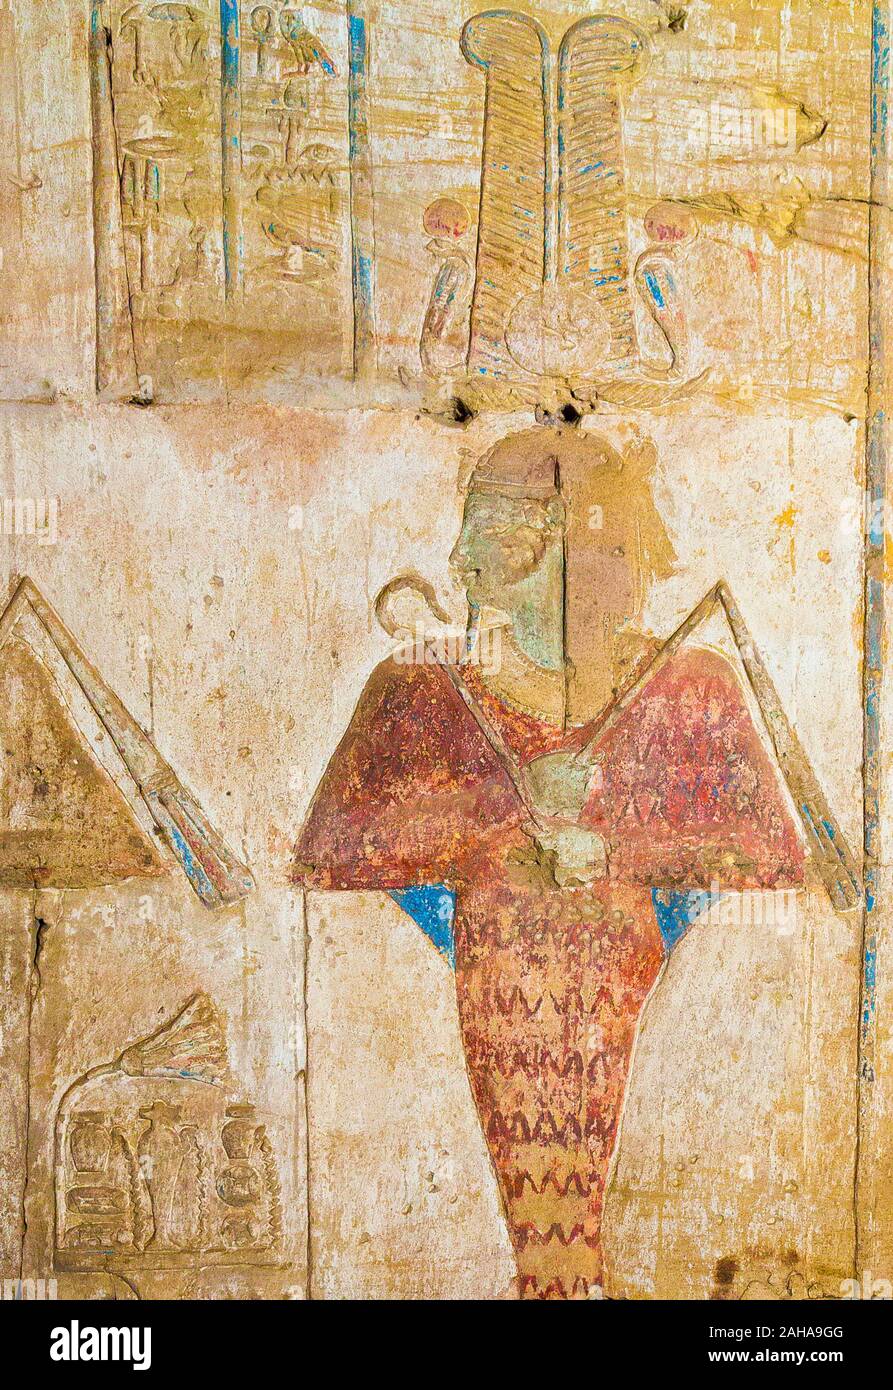 UNESCO World Heritage, Thebes in Egypt, Karnak site, ptolemaic temple of Opet. Osiris god wears a mummy tunique and a crown with 2 feathers. Stock Photo